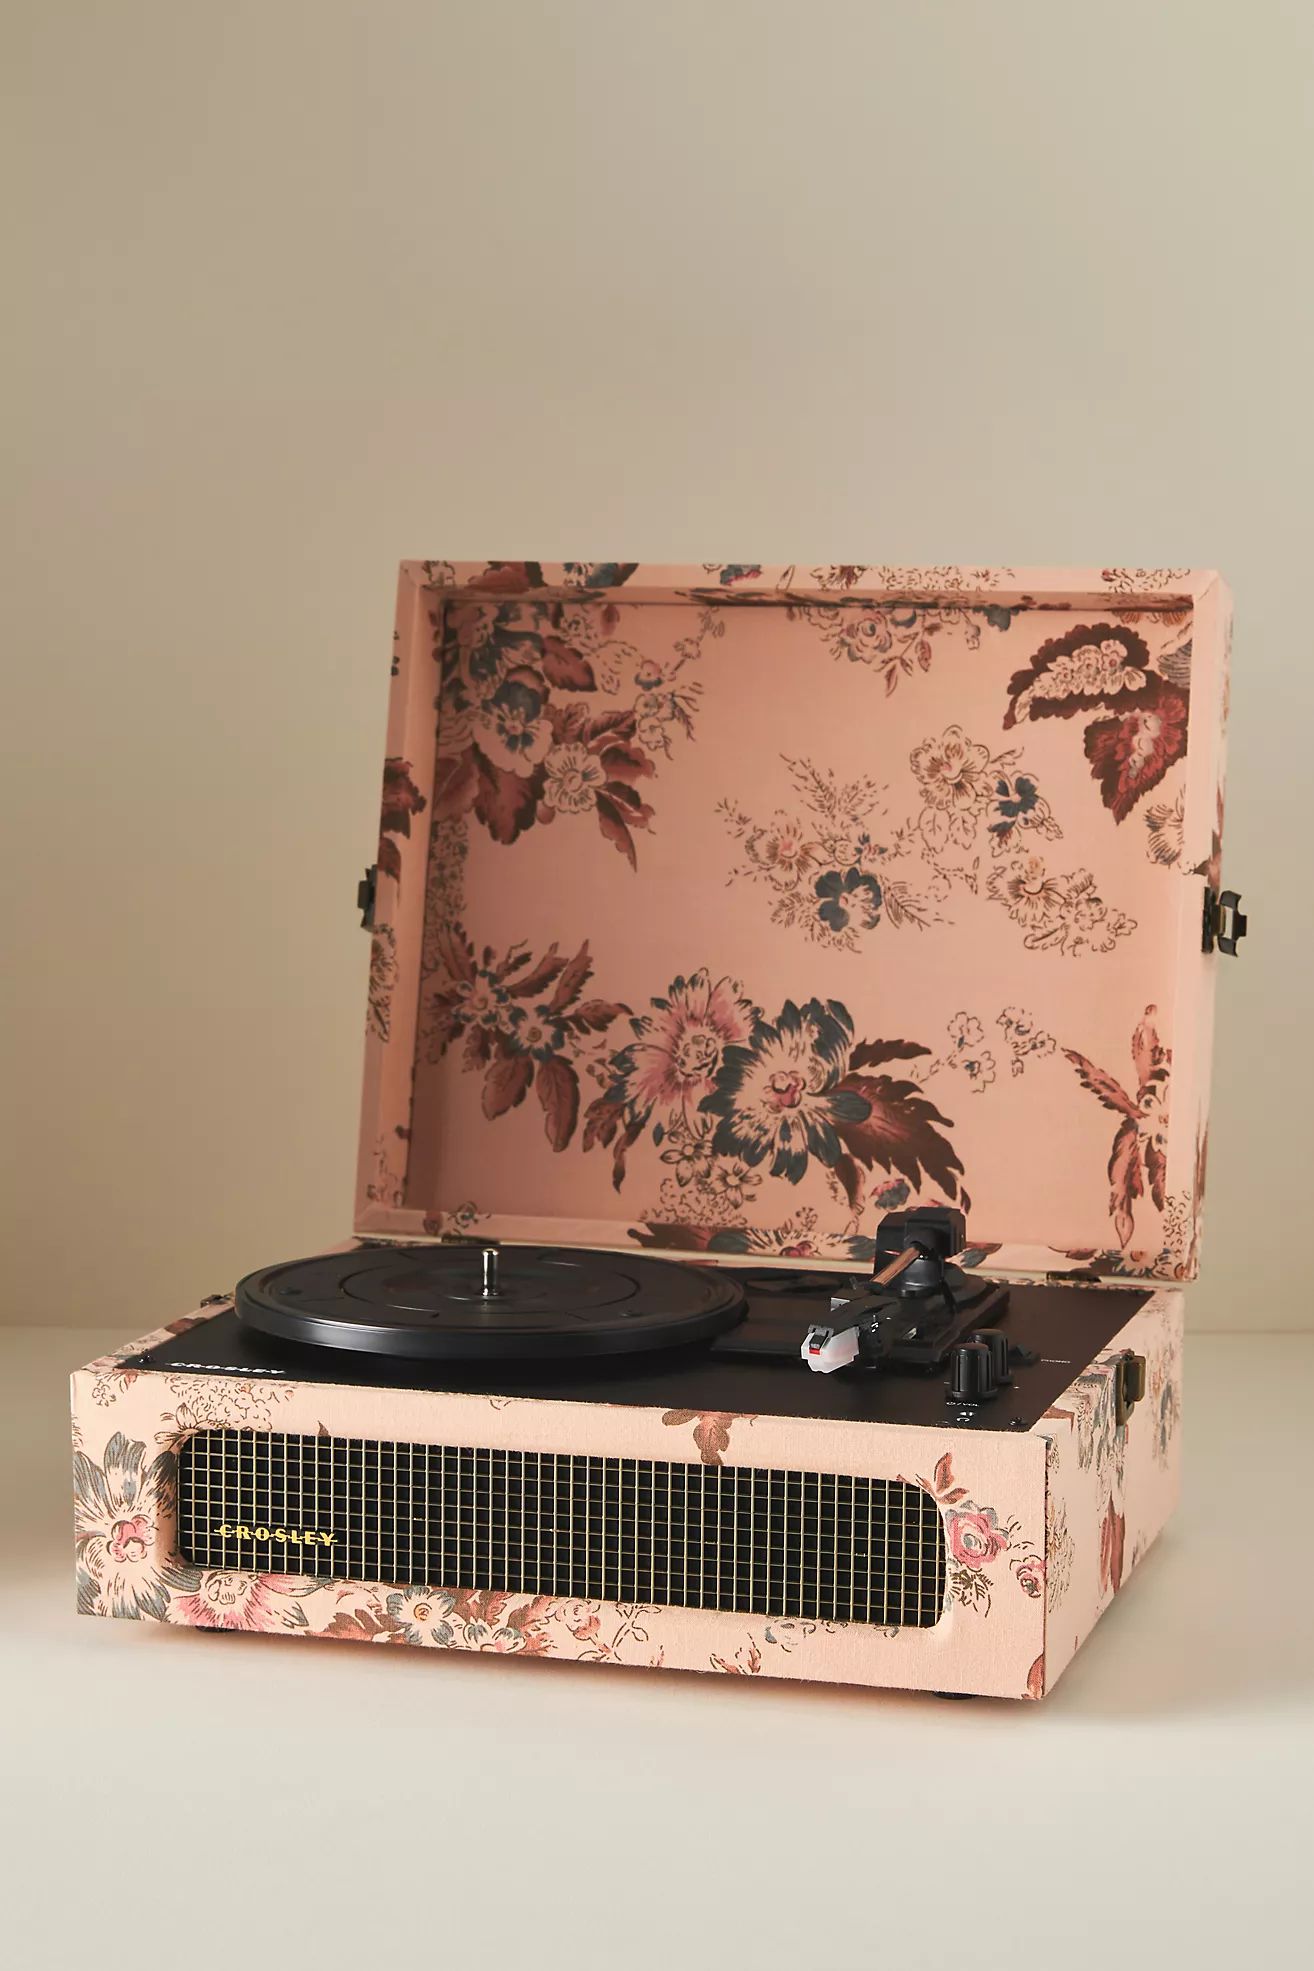 Crosley Voyager Record Player | Anthropologie (US)